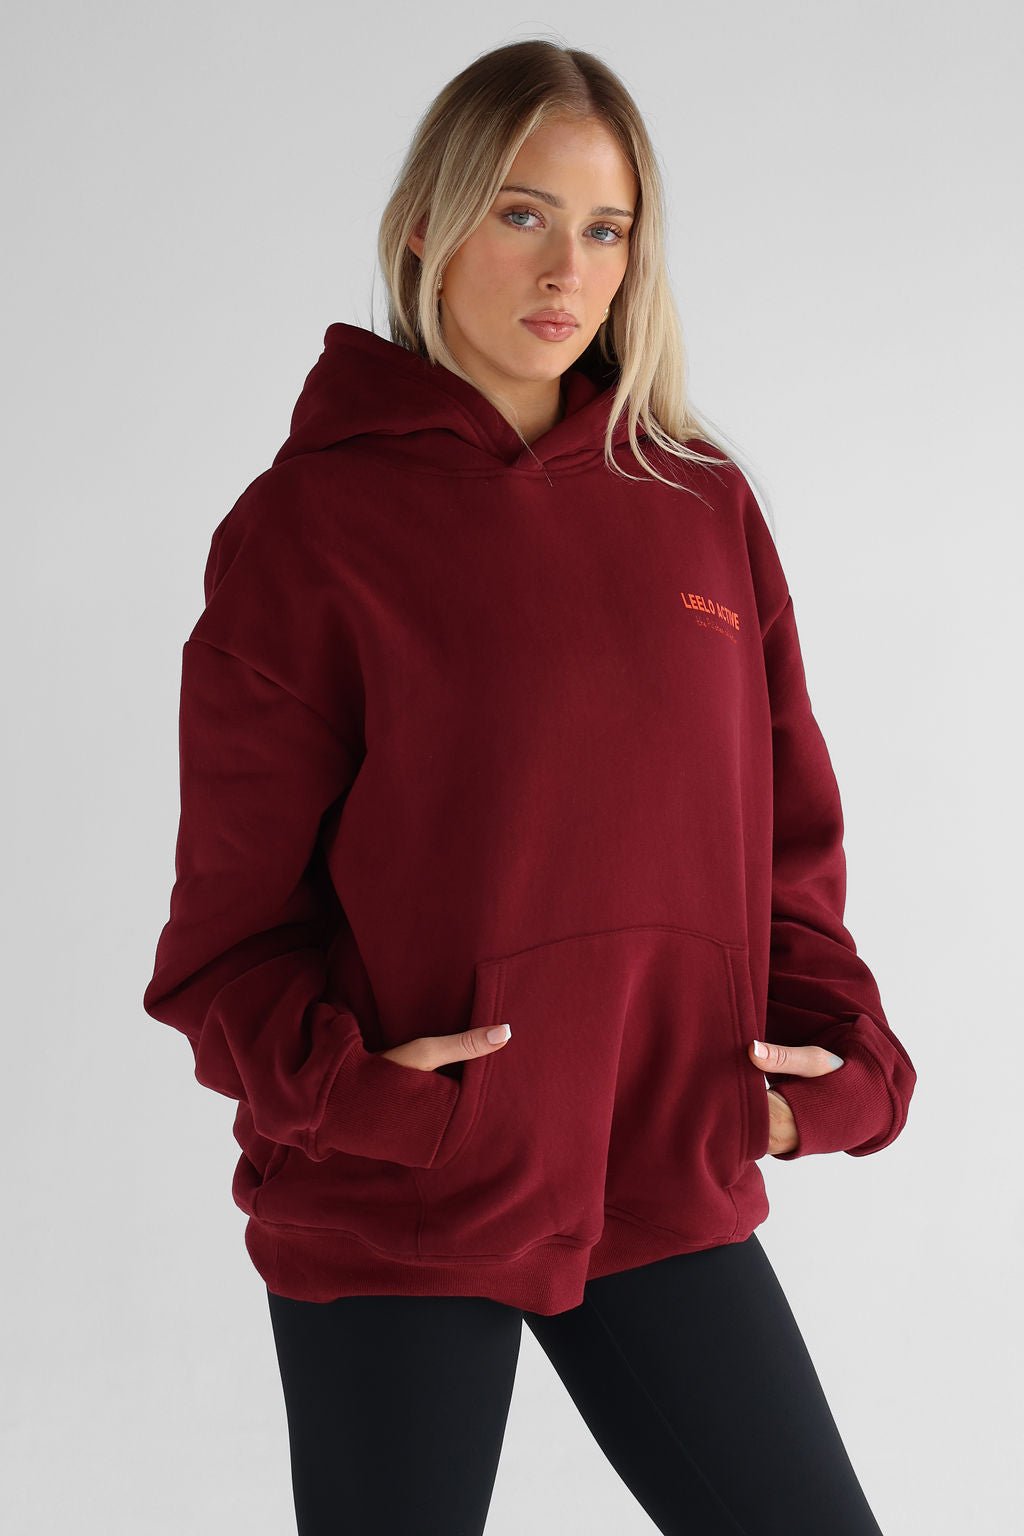 V2 The Pilates Collection Hoodie - Cherry Cola - LEELO ACTIVE